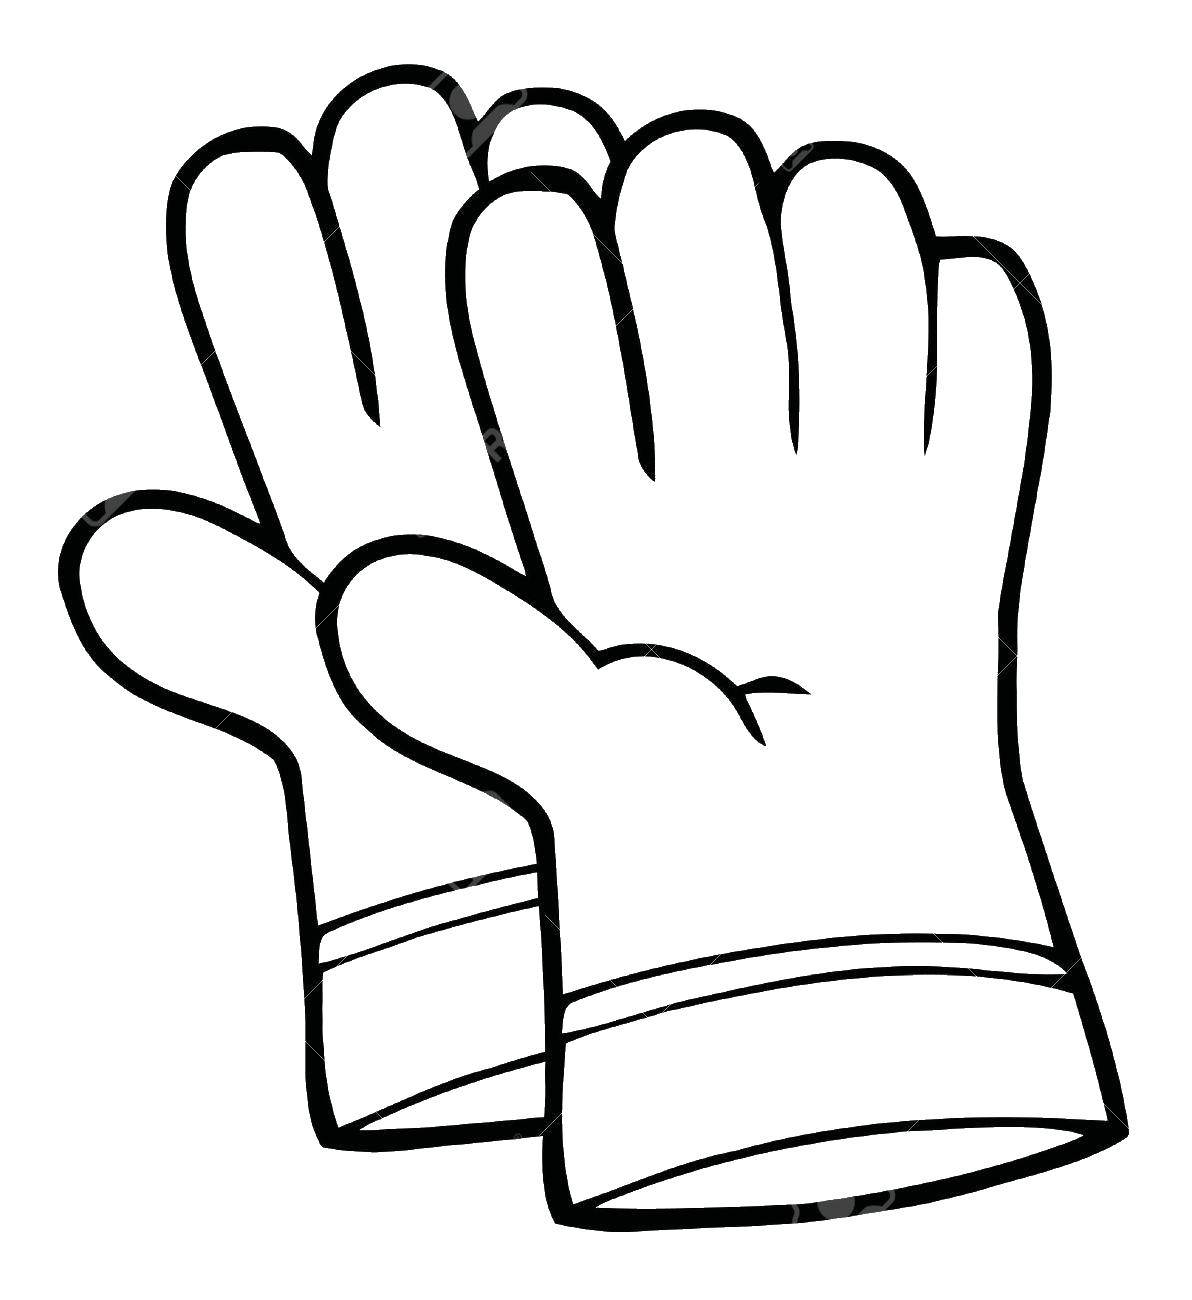 Coloring Gloves. Category Clothing. Tags:  clothing, gloves.